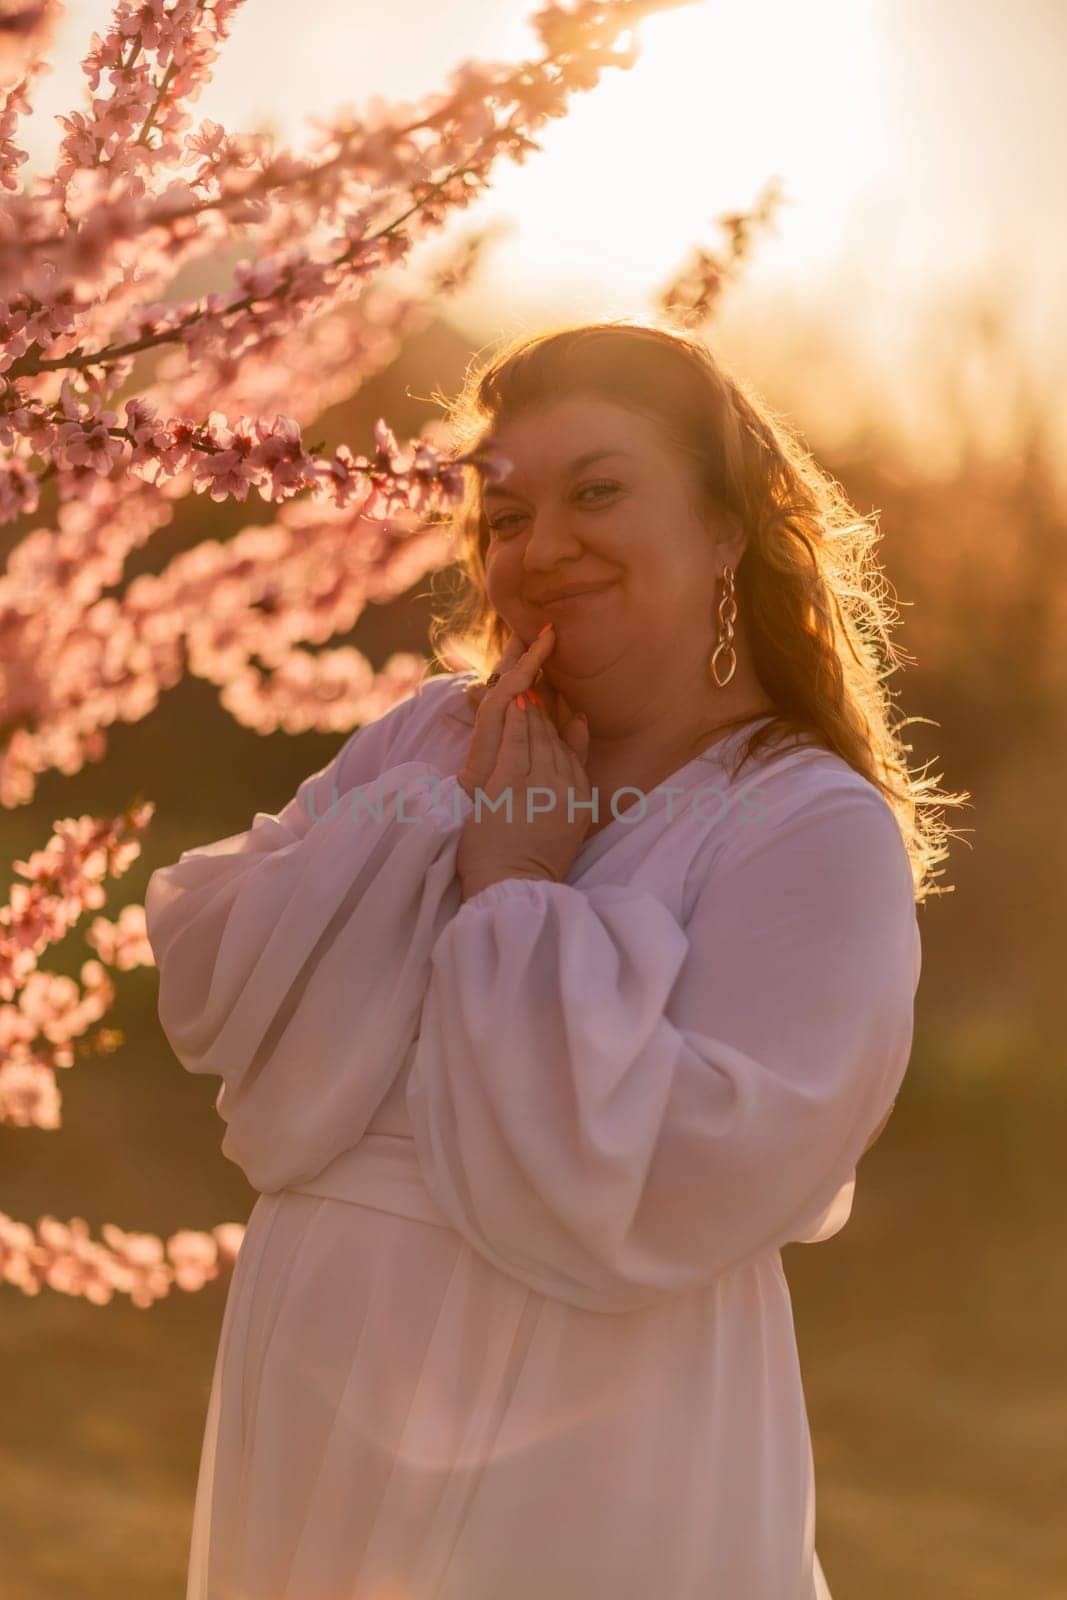 Woman blooming peach orchard. Against the backdrop of a picturesque peach orchard, a woman in a long white dress enjoys a peaceful walk in the park, surrounded by the beauty of nature